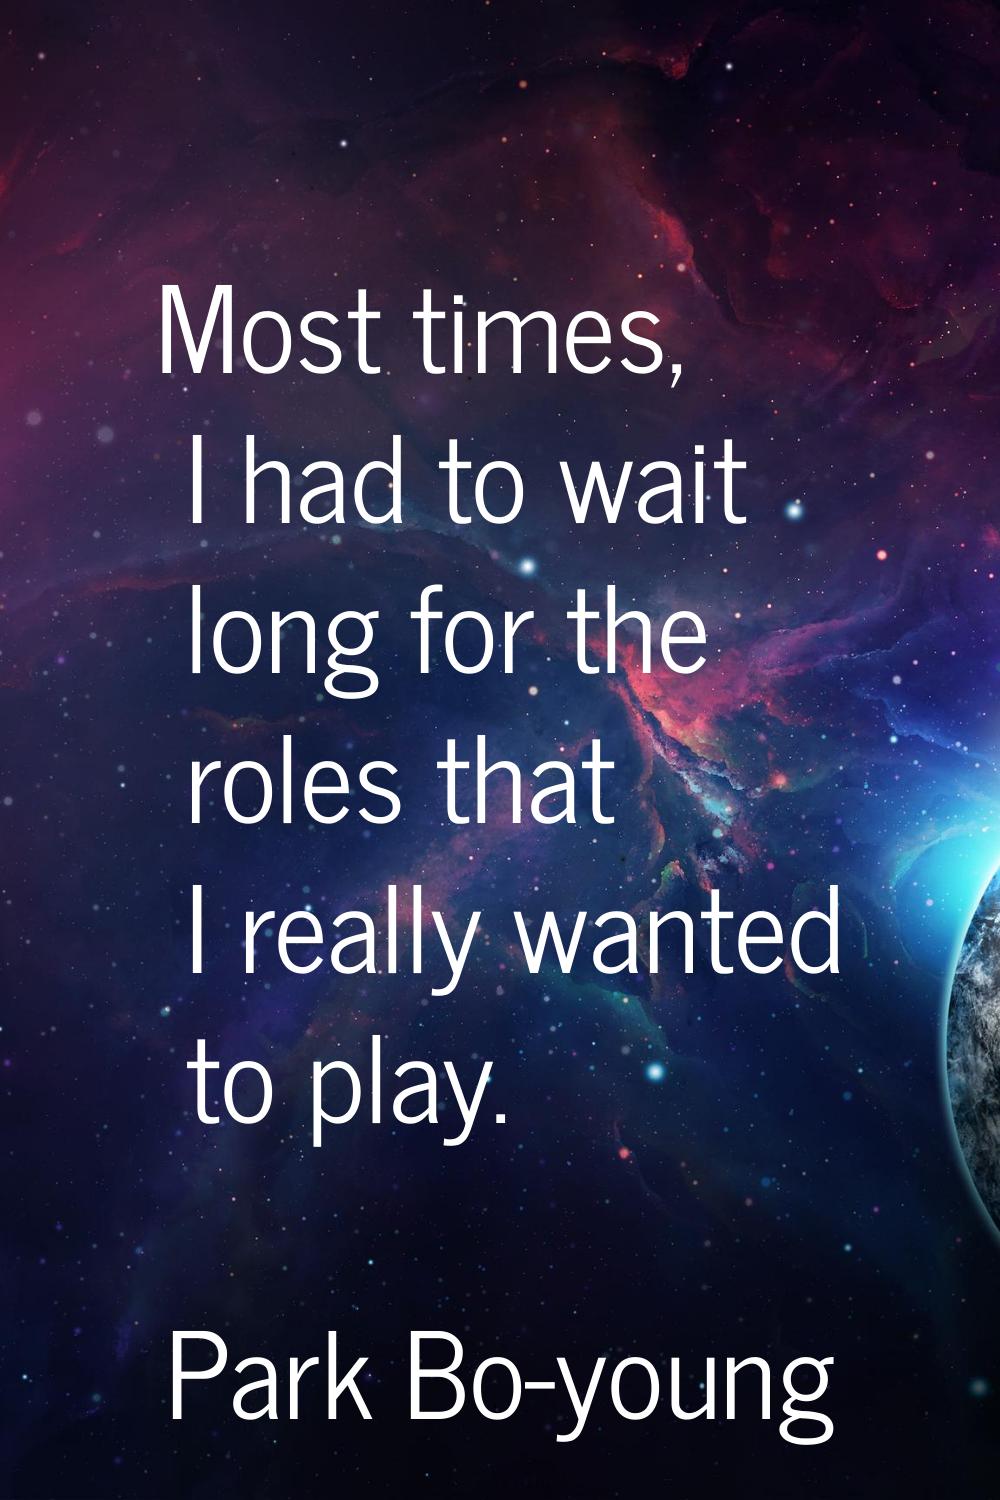 Most times, I had to wait long for the roles that I really wanted to play.